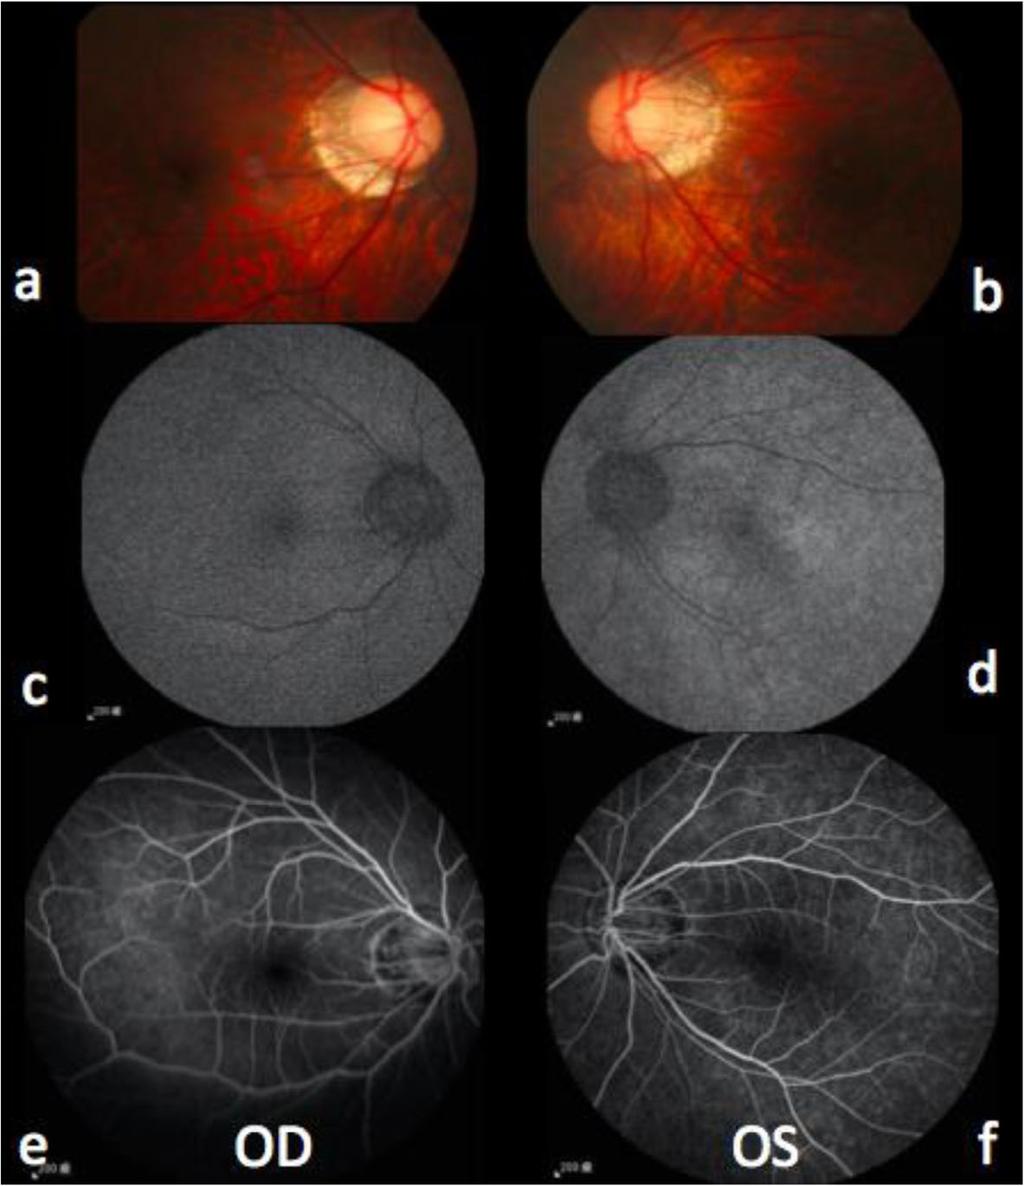 Kuo et al. BMC Ophthalmology (2017) 17:236 Page 3 of 6 Fig. 2 Binocular images of color fundoscopy, fundus autofluorescence, and fluorescein angiography on the next day after onset of symptoms.